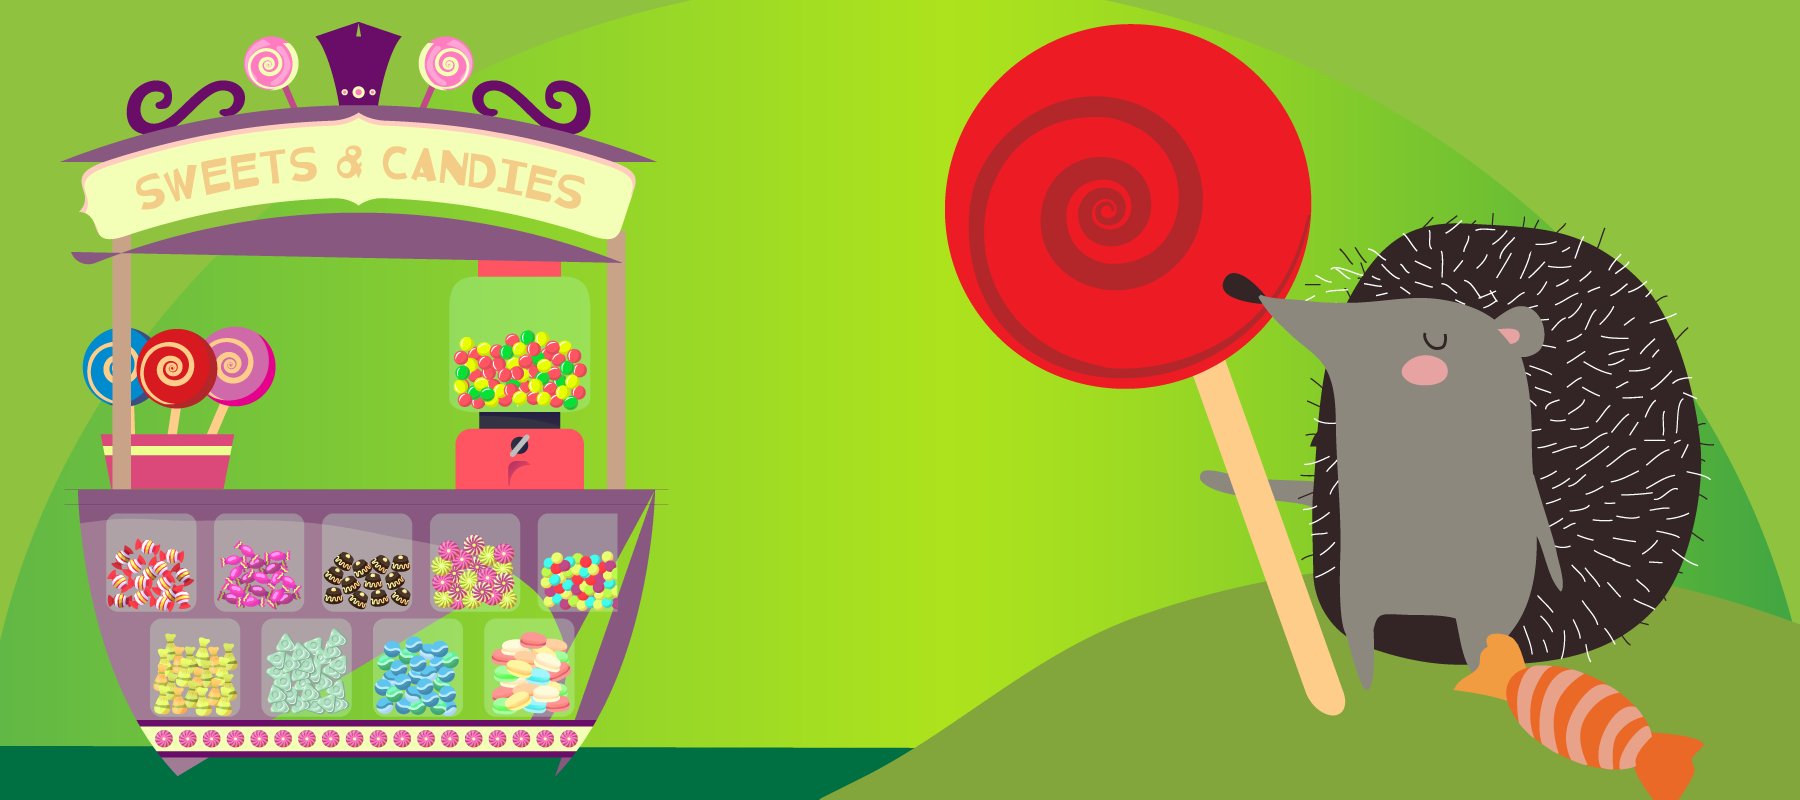 ILLUSTRATION: on the right a candy stand loaded with treats, on the left a hedgehog holding a giant lollipop